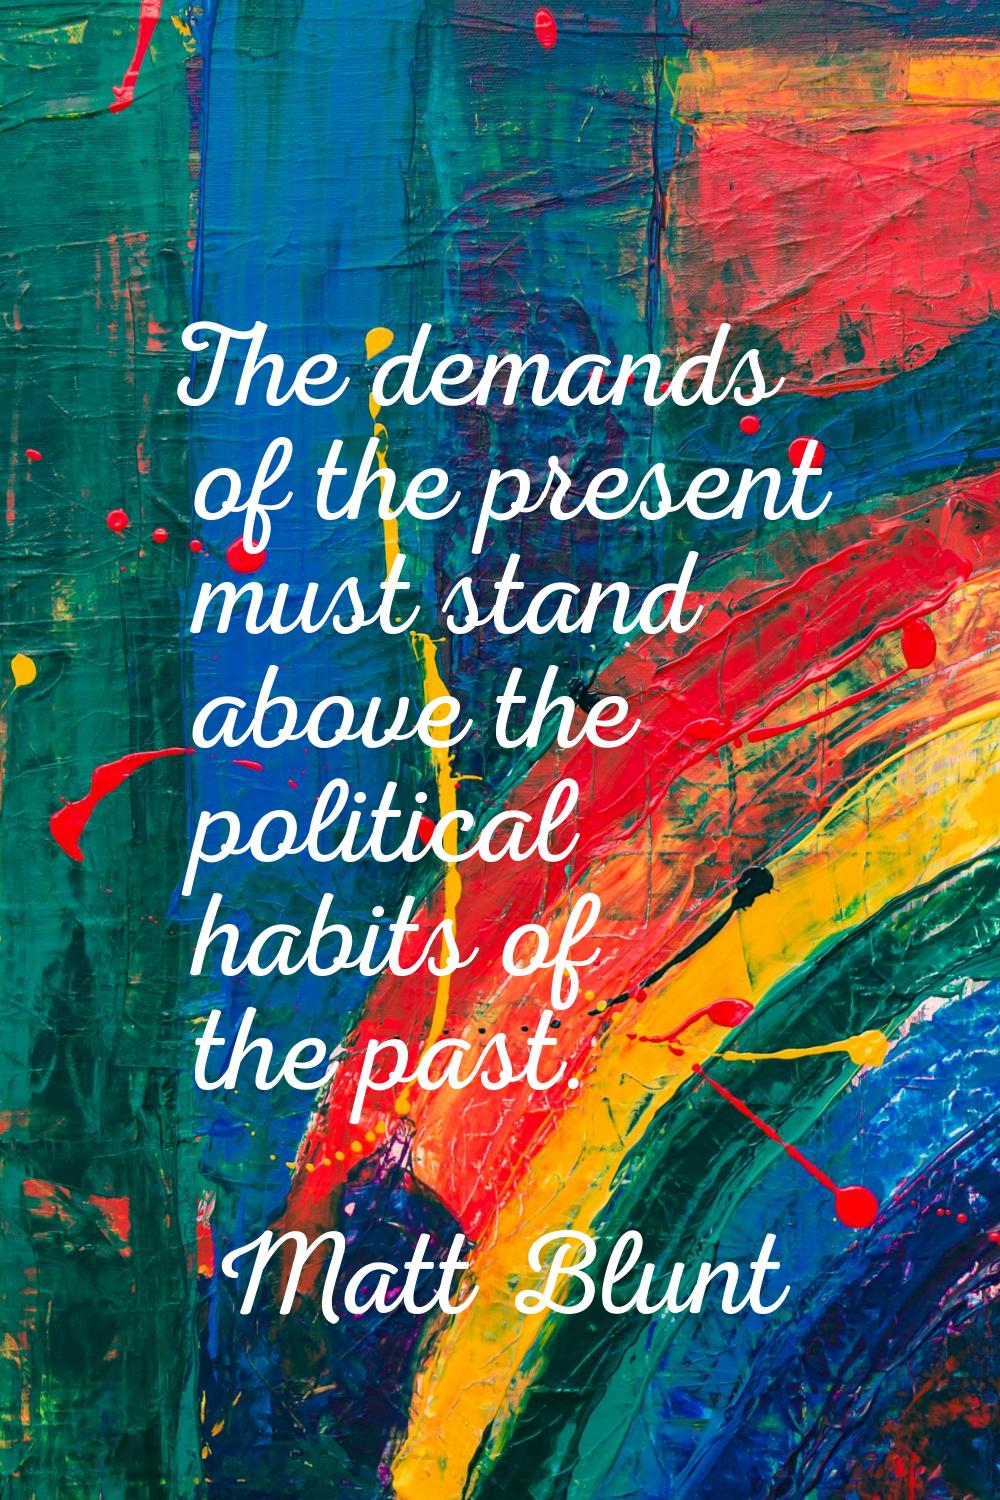 The demands of the present must stand above the political habits of the past.